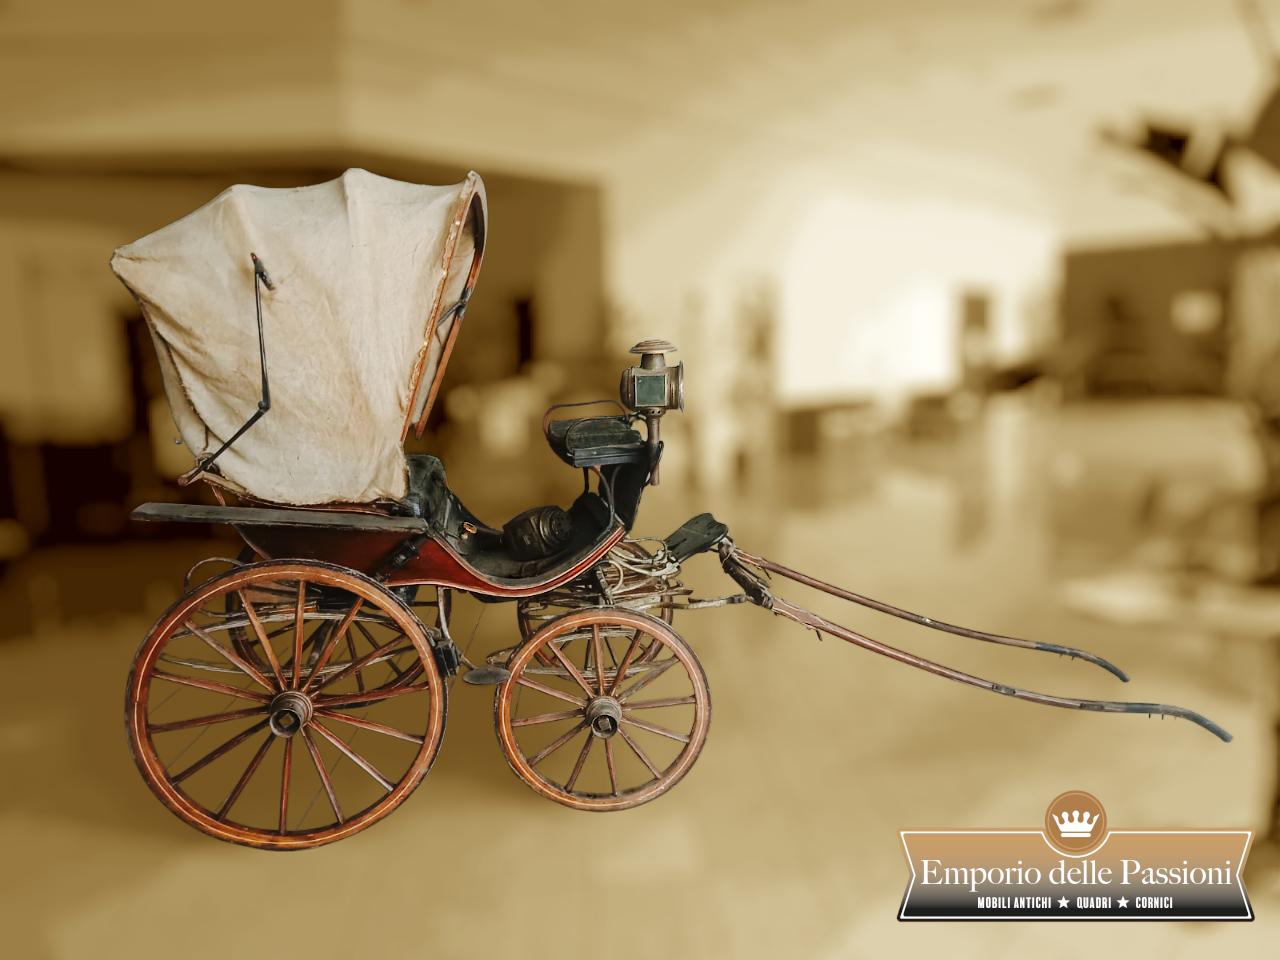 Original Italian carriage from around 1870-80.
Four-wheeled carriage equipped with a large foldable canvas bellows,
with a two-seat seat for passengers and fitted with a higher seat for the coachman.
The back seat is in black leather, padded and